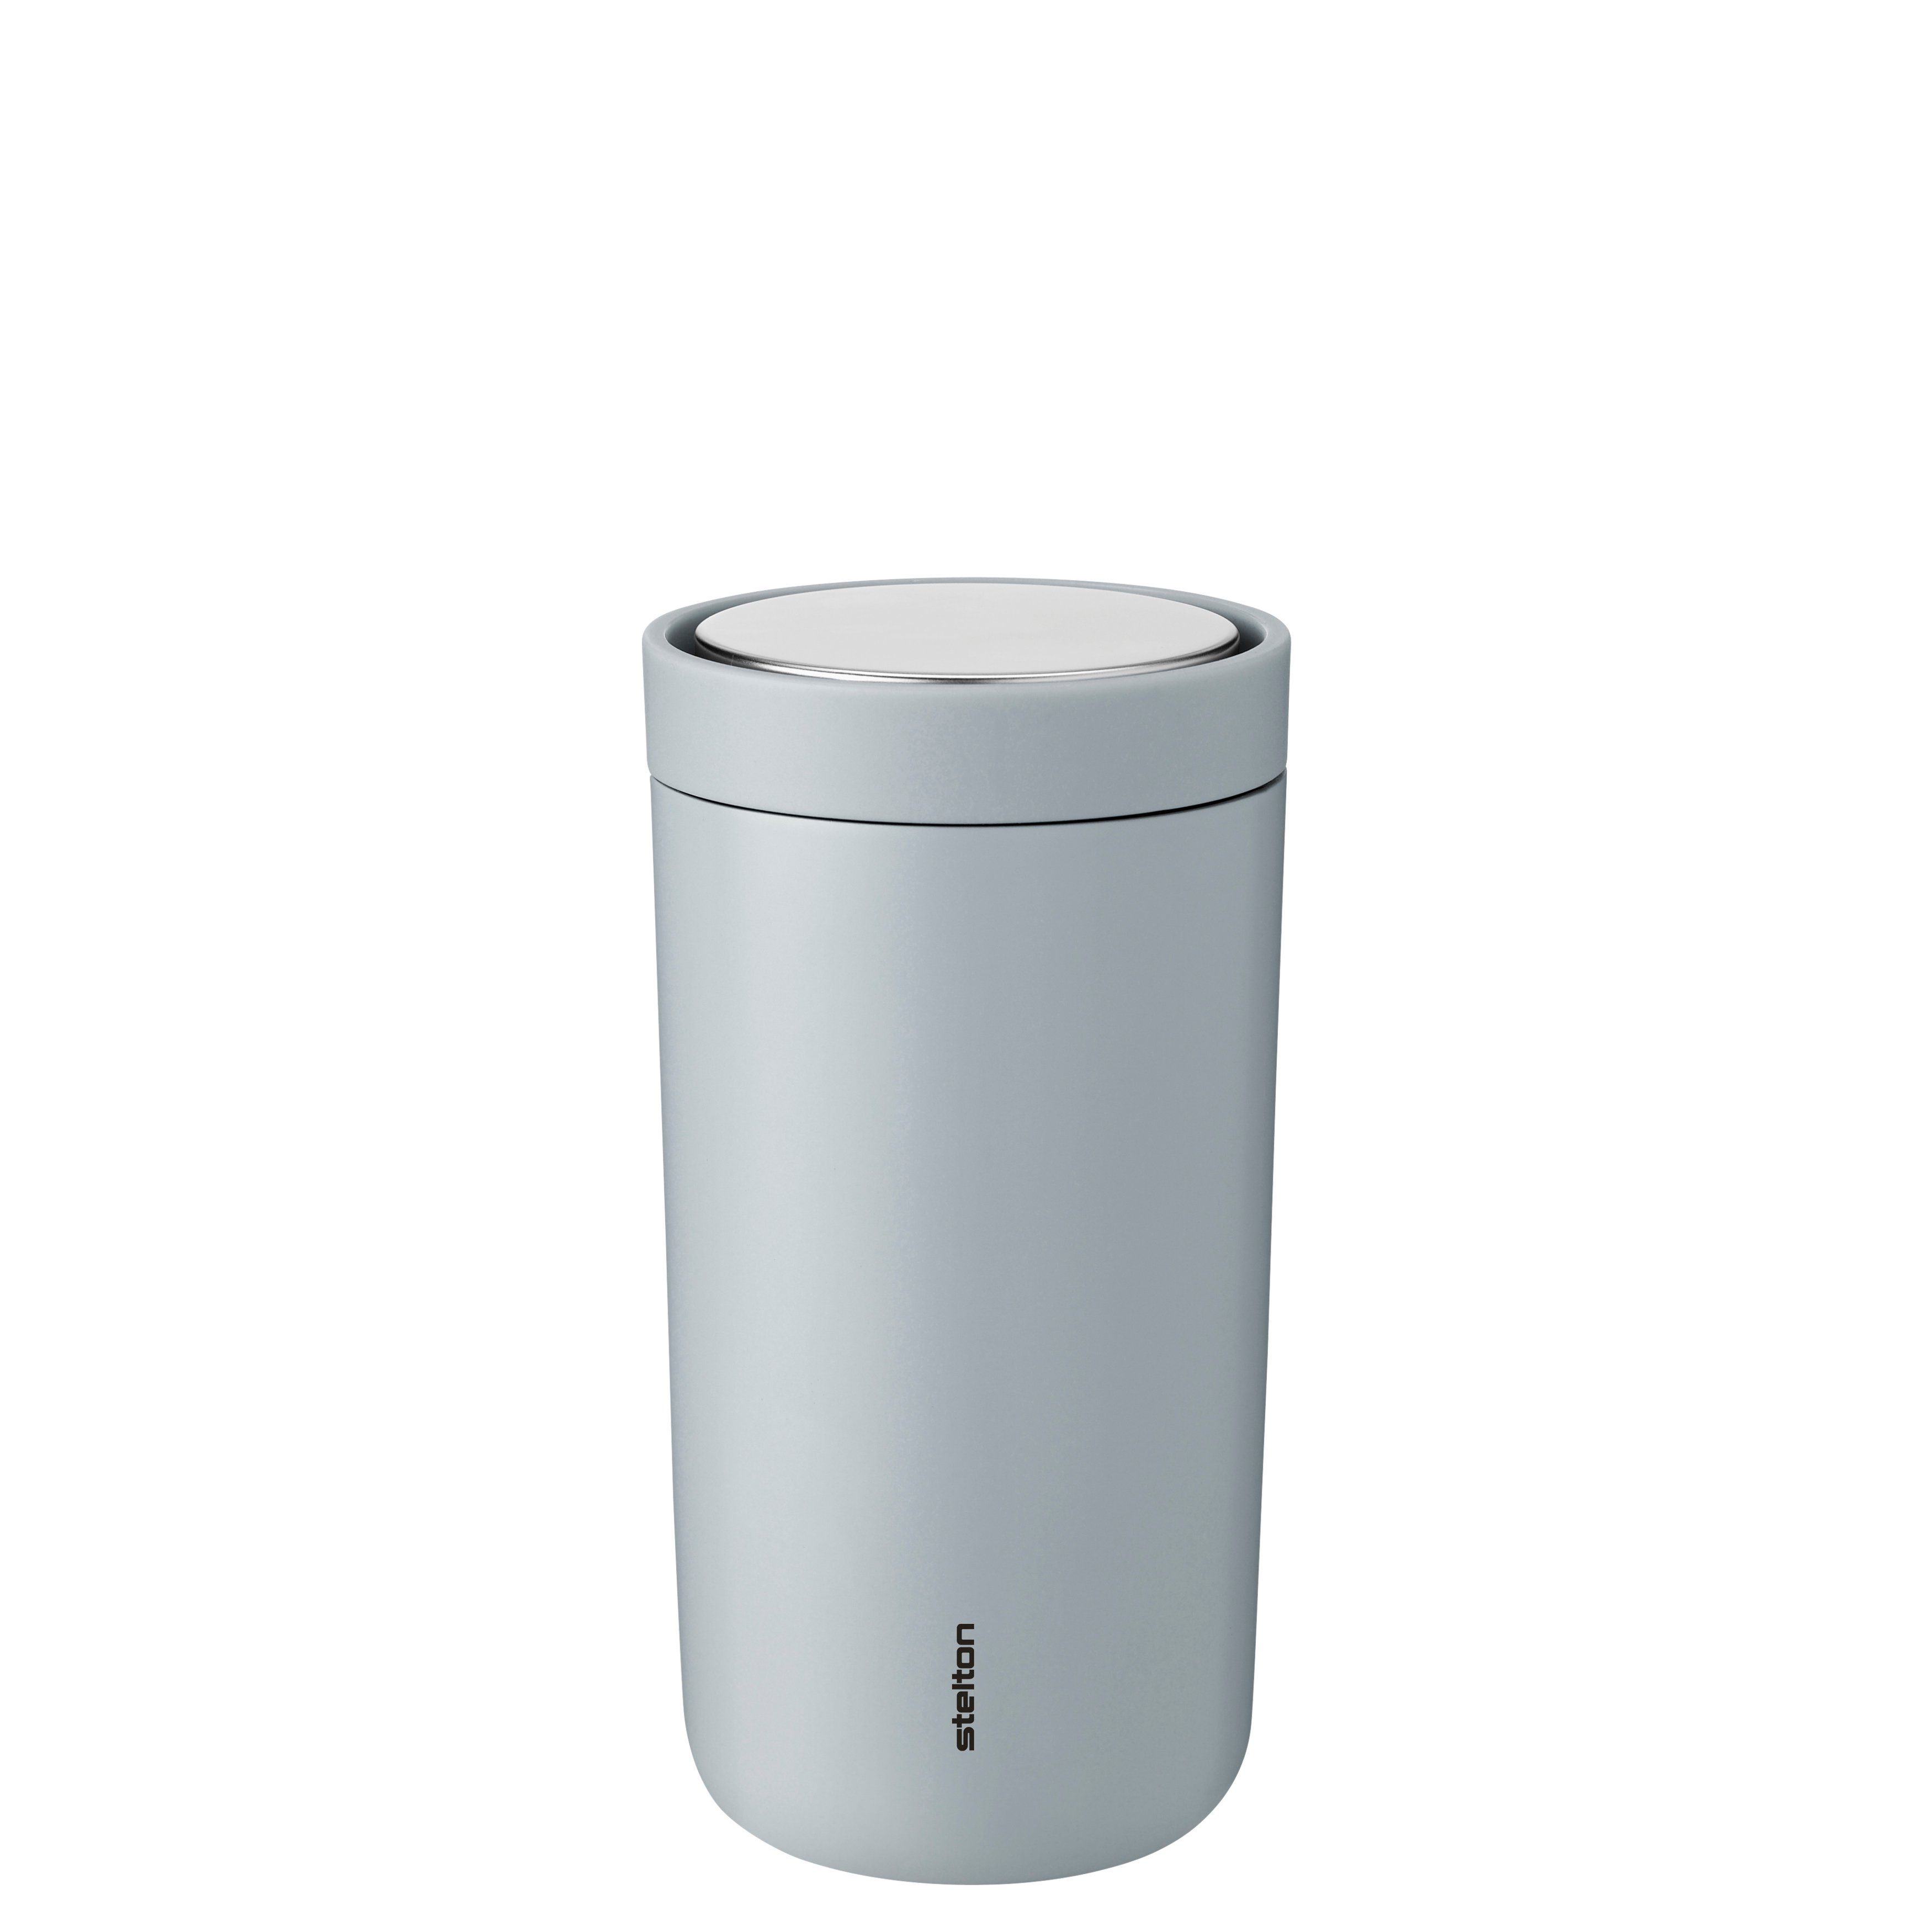 Stelton l., 0.2 Soft Thermobecher Go Click cloud To Stelton Edelstahl Thermobecher